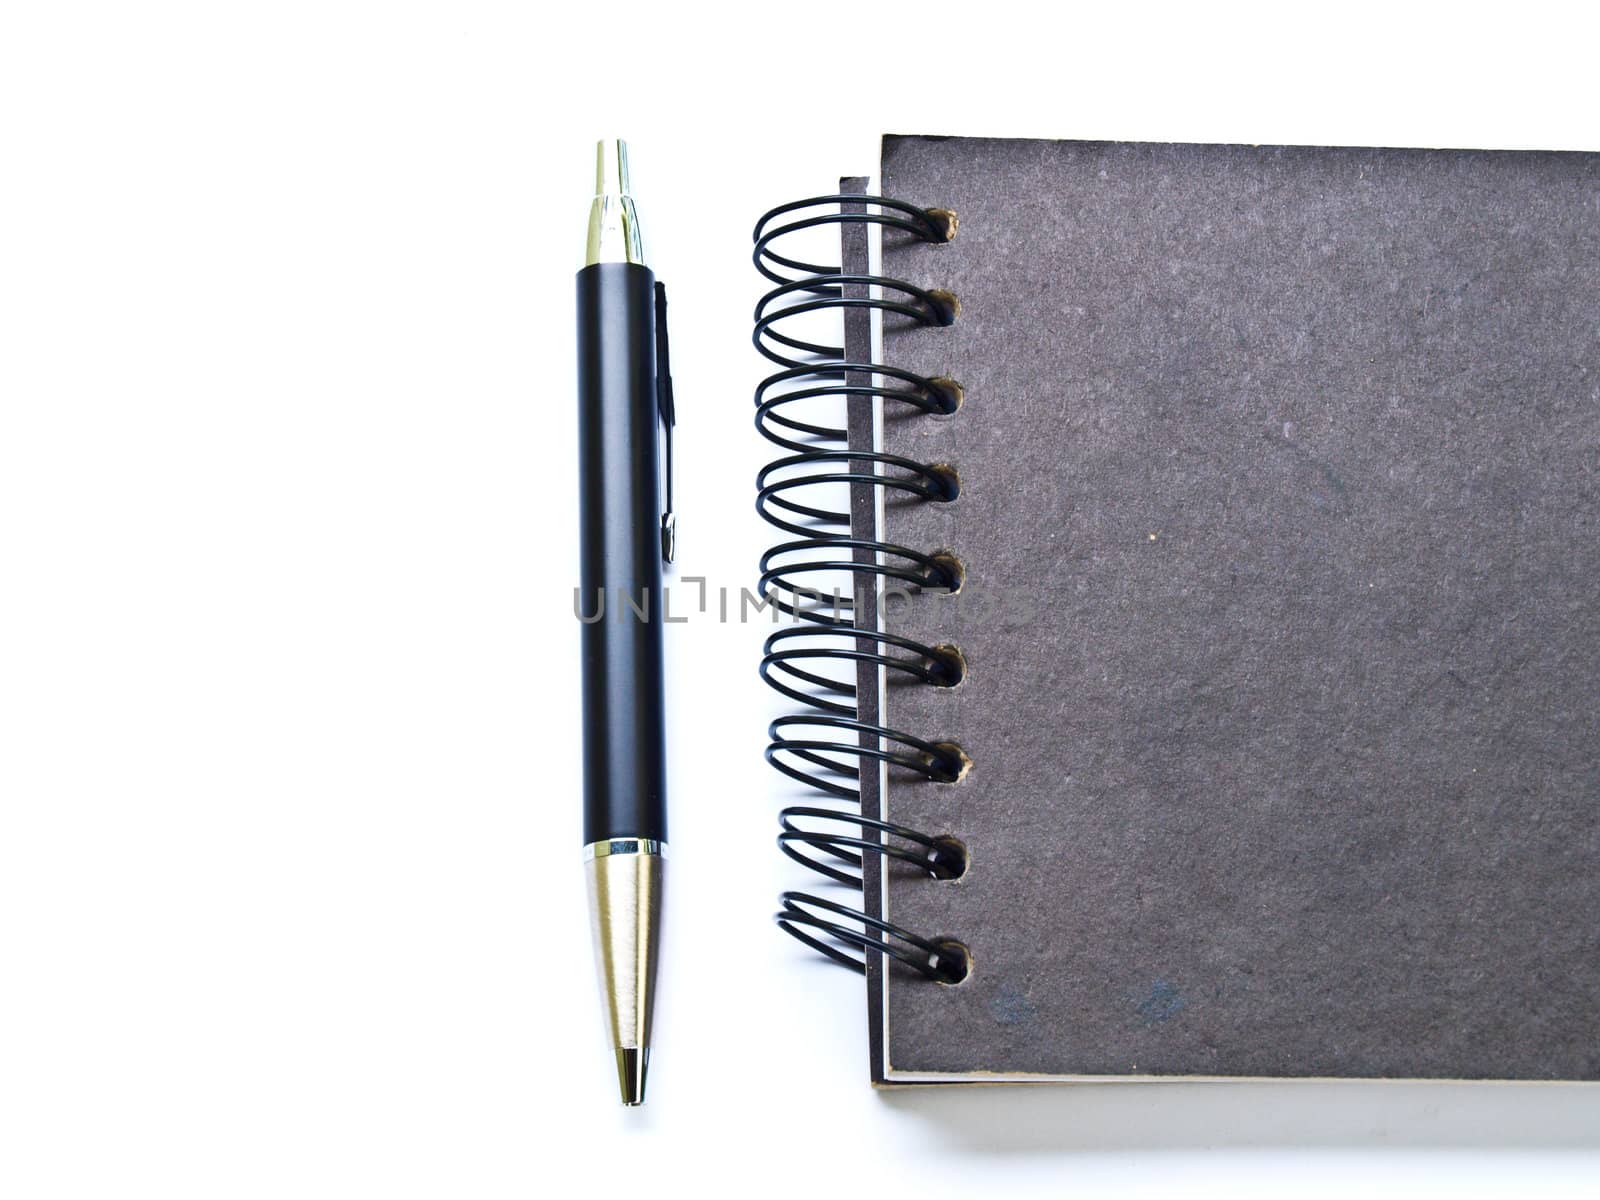 Ballpen and a black spiral binding notebook cover on white